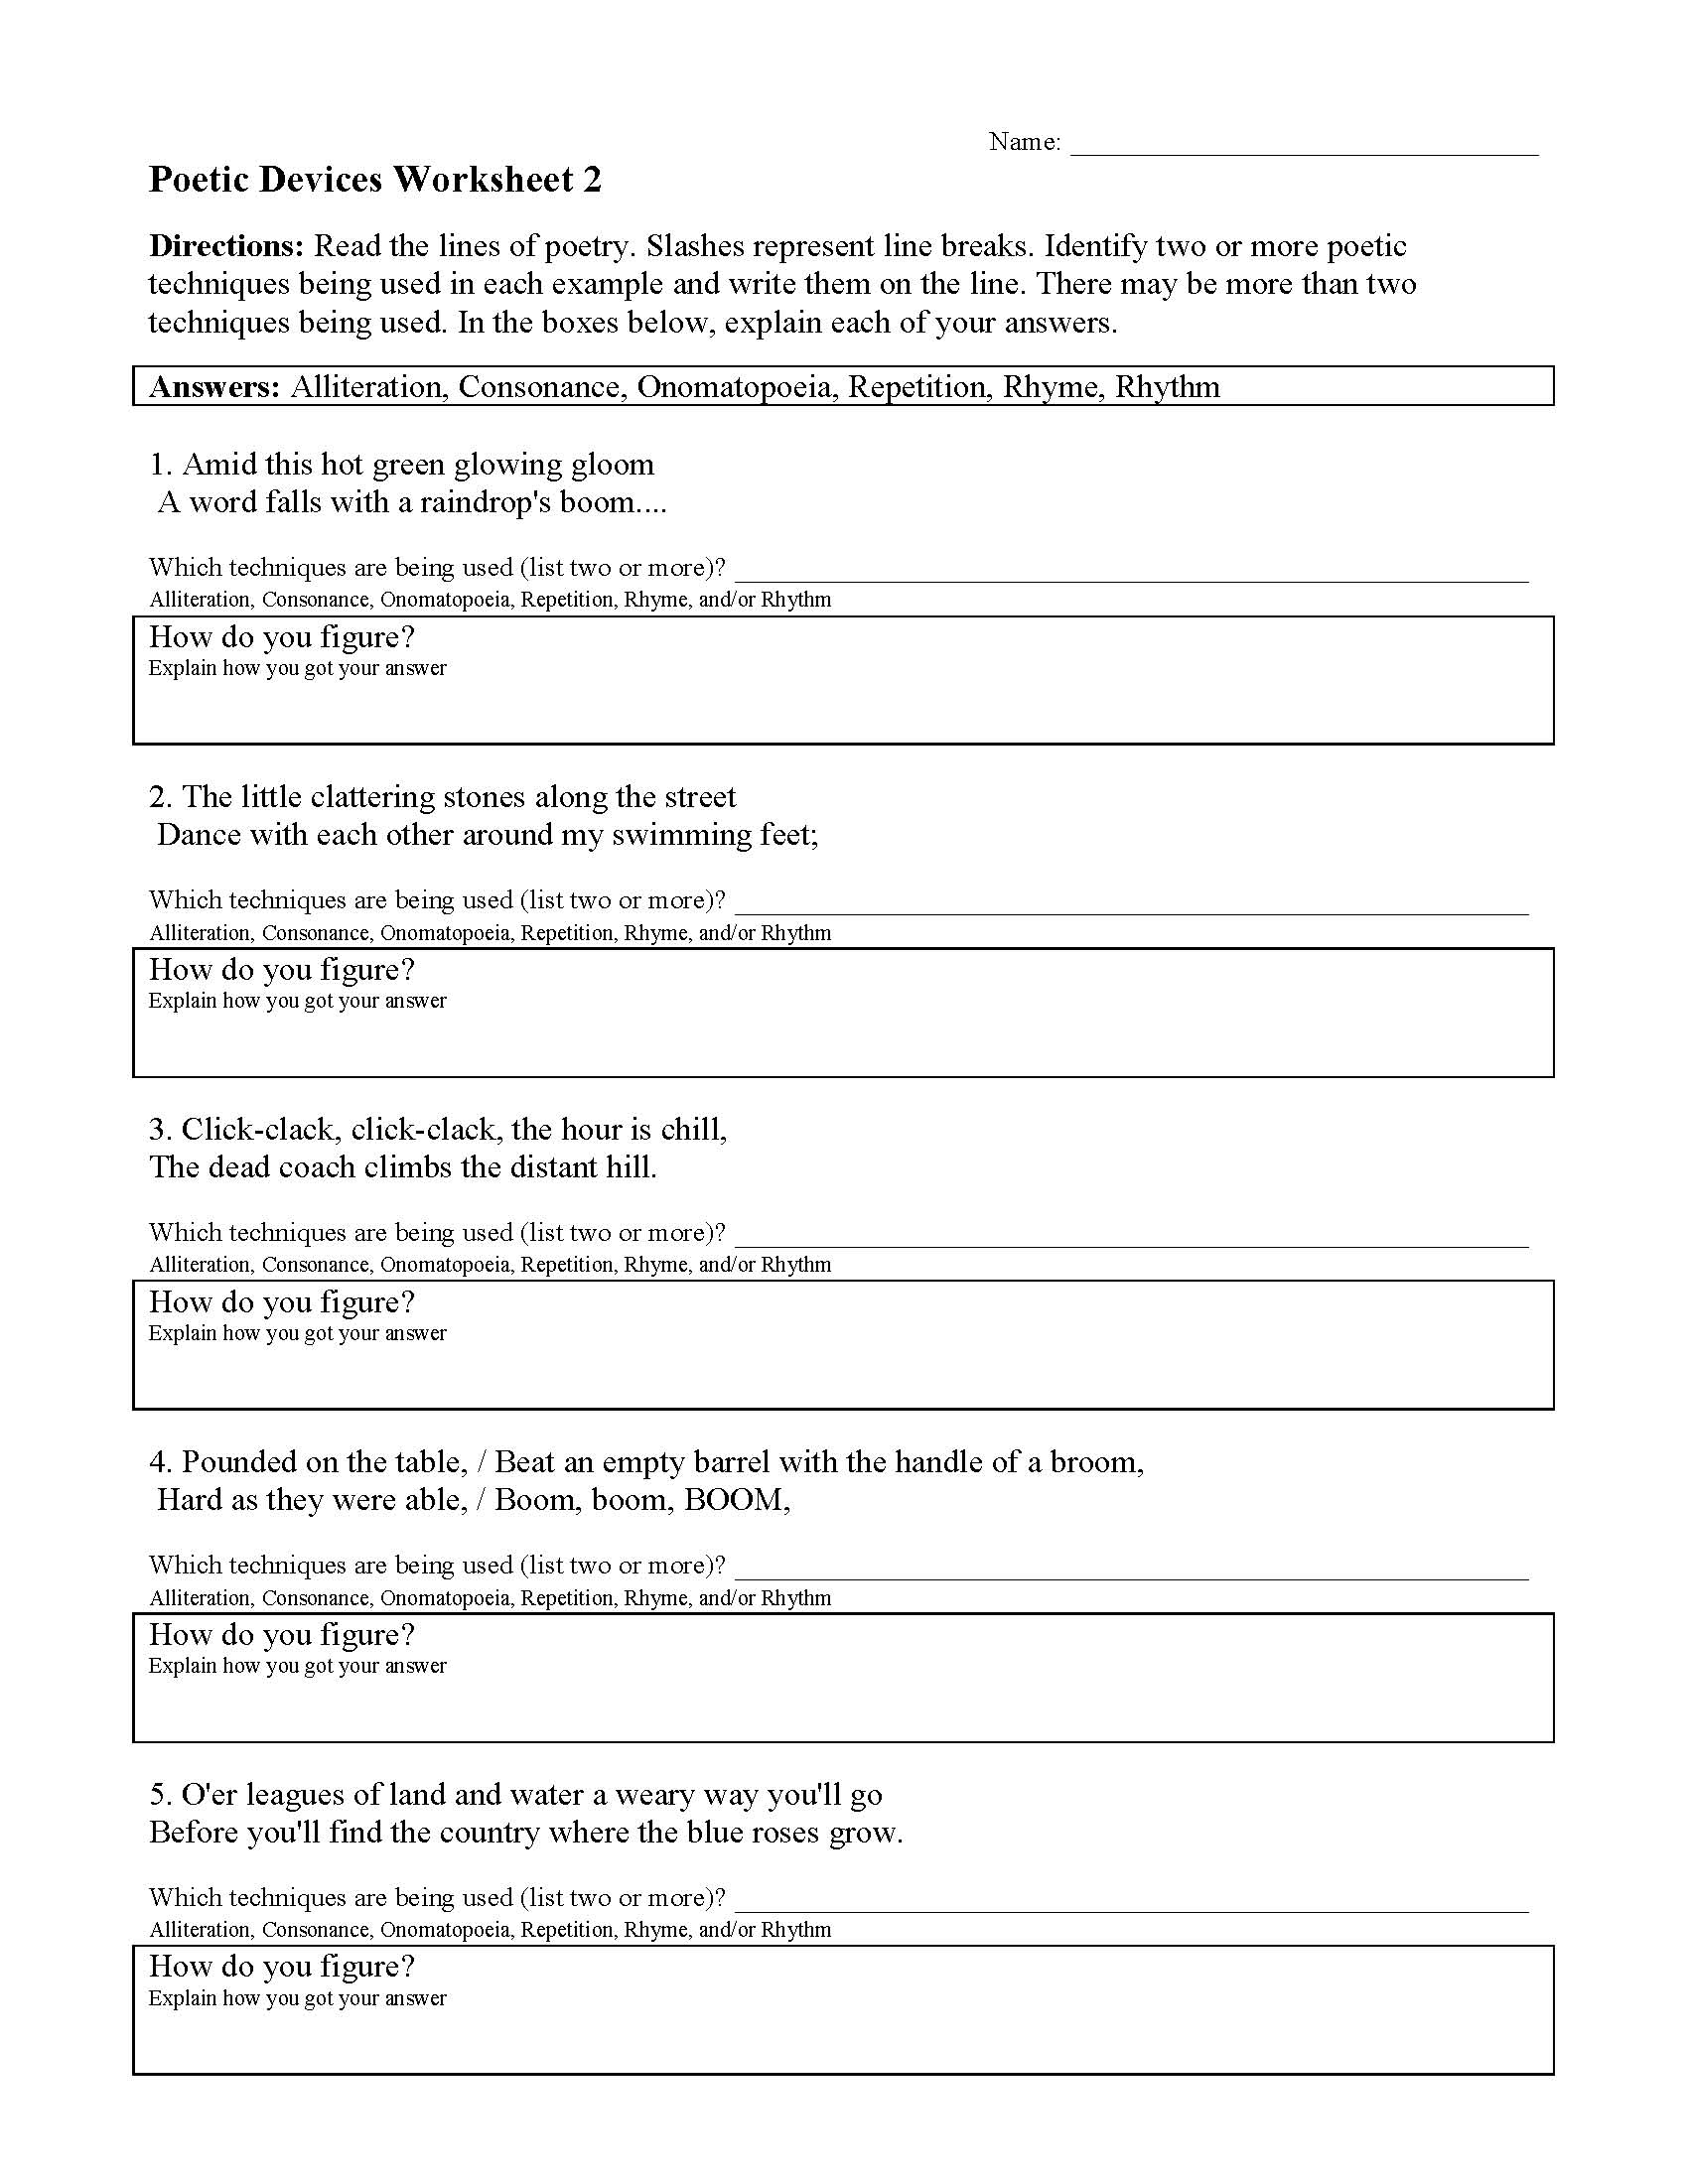 Poetic Devices Worksheet 20  Reading Activity In Poetic Devices Worksheet 1